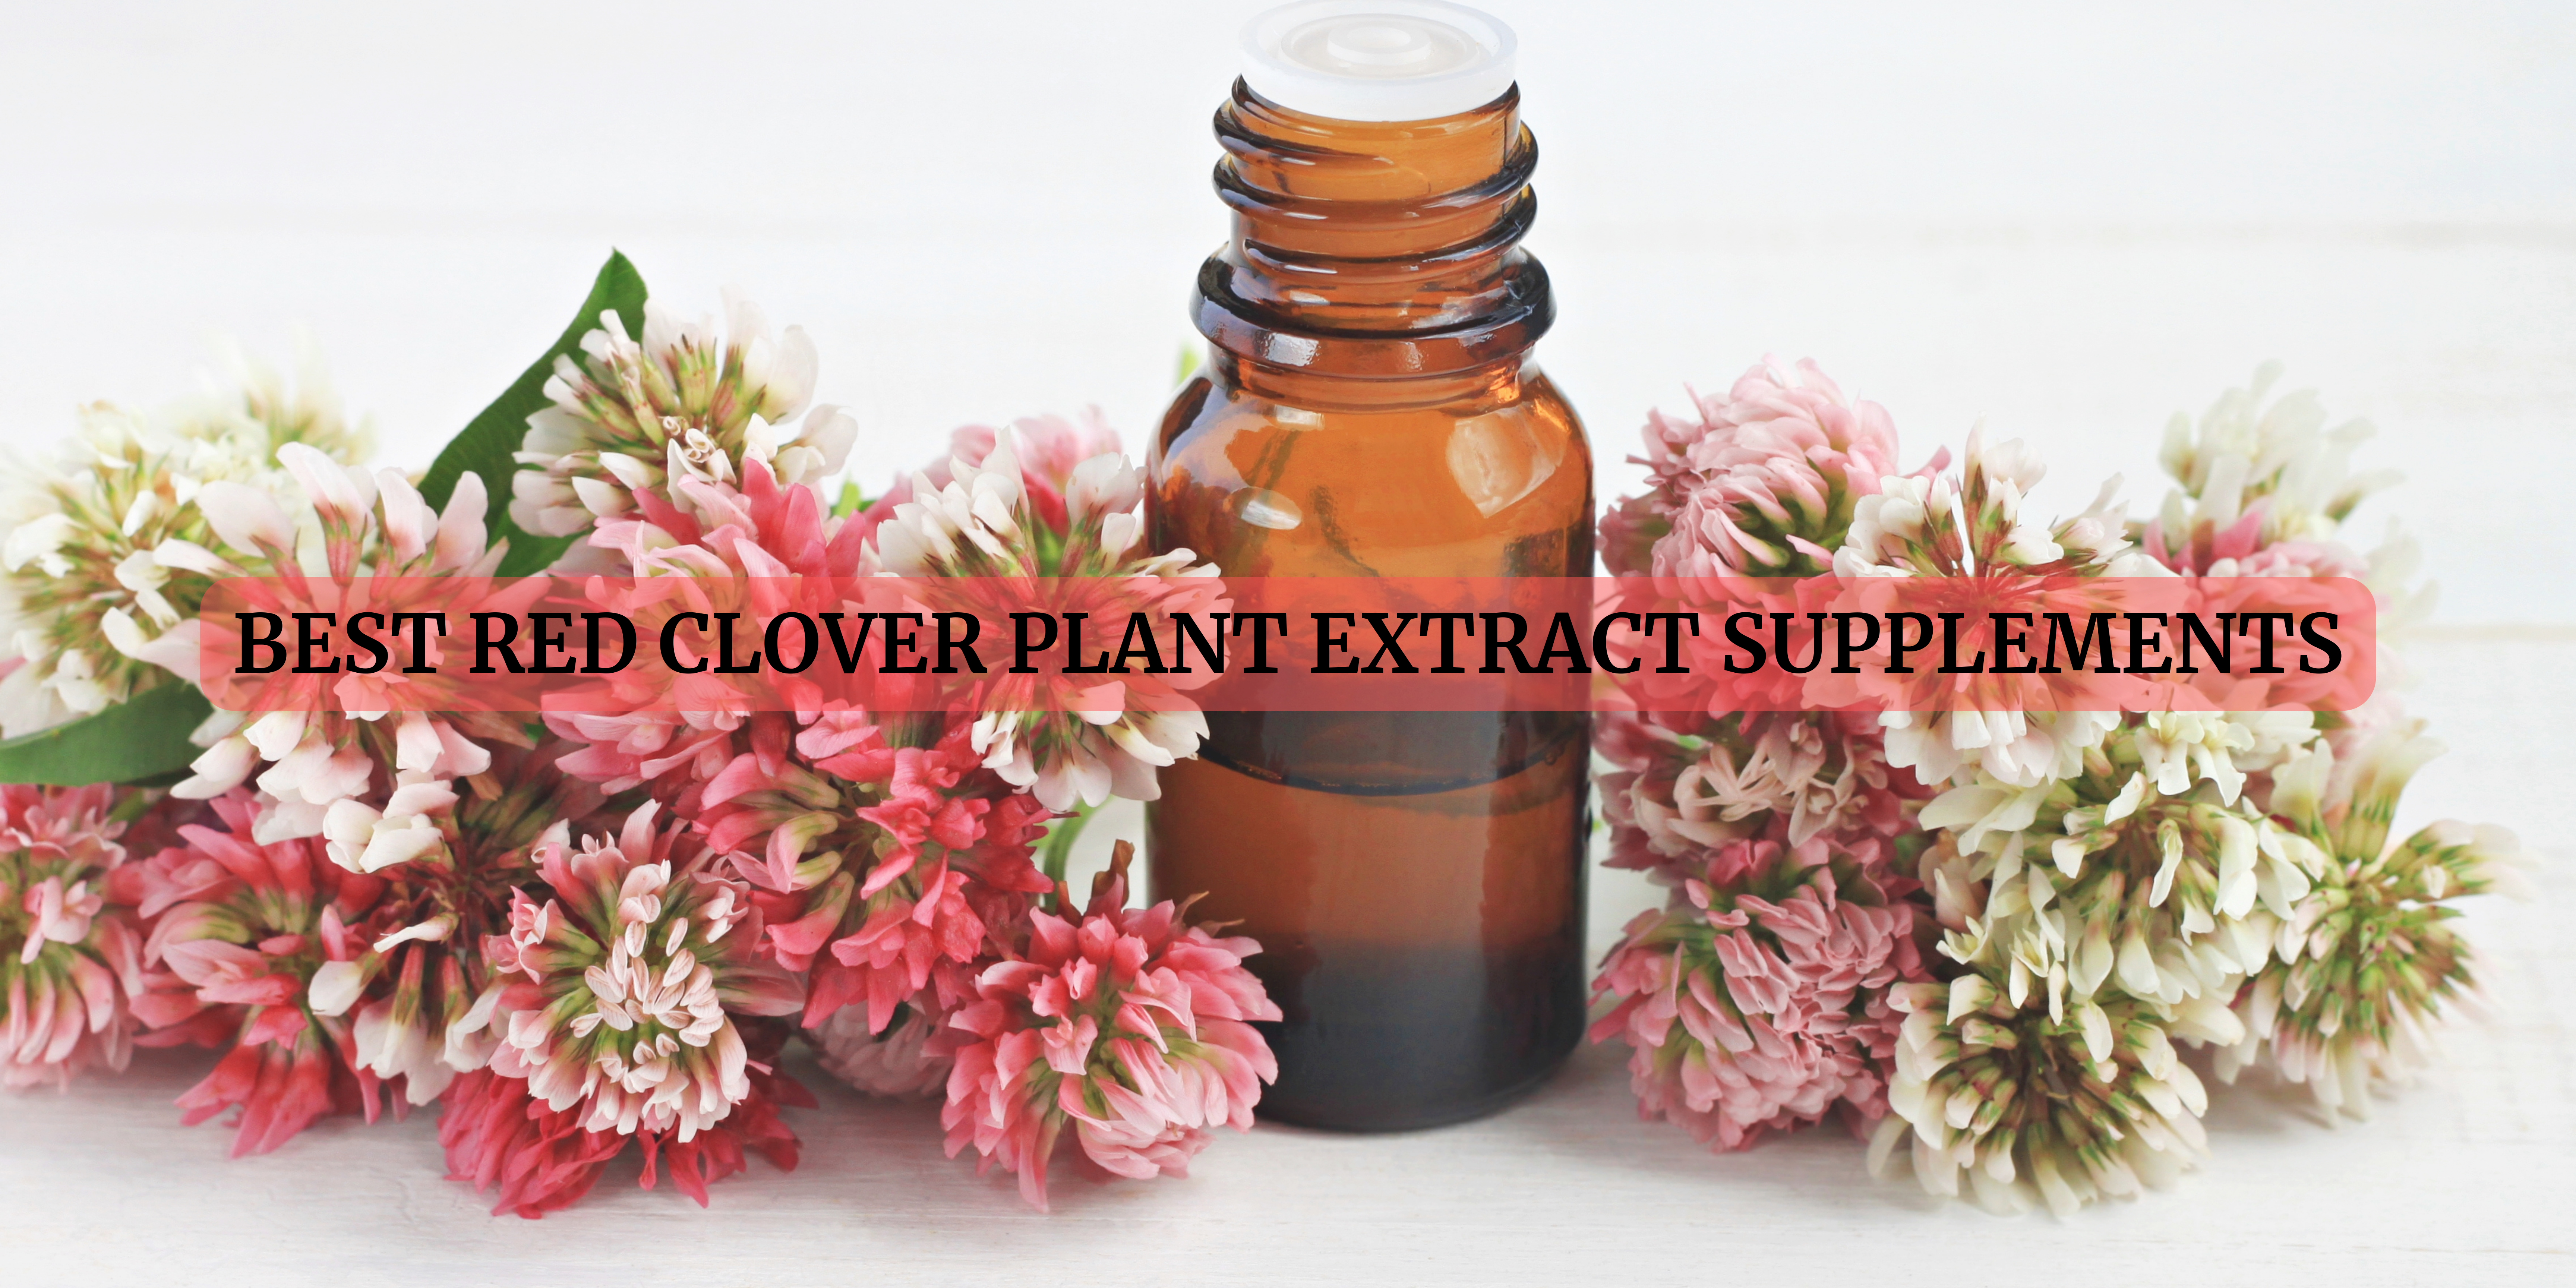 red clover extract supplements in Spain